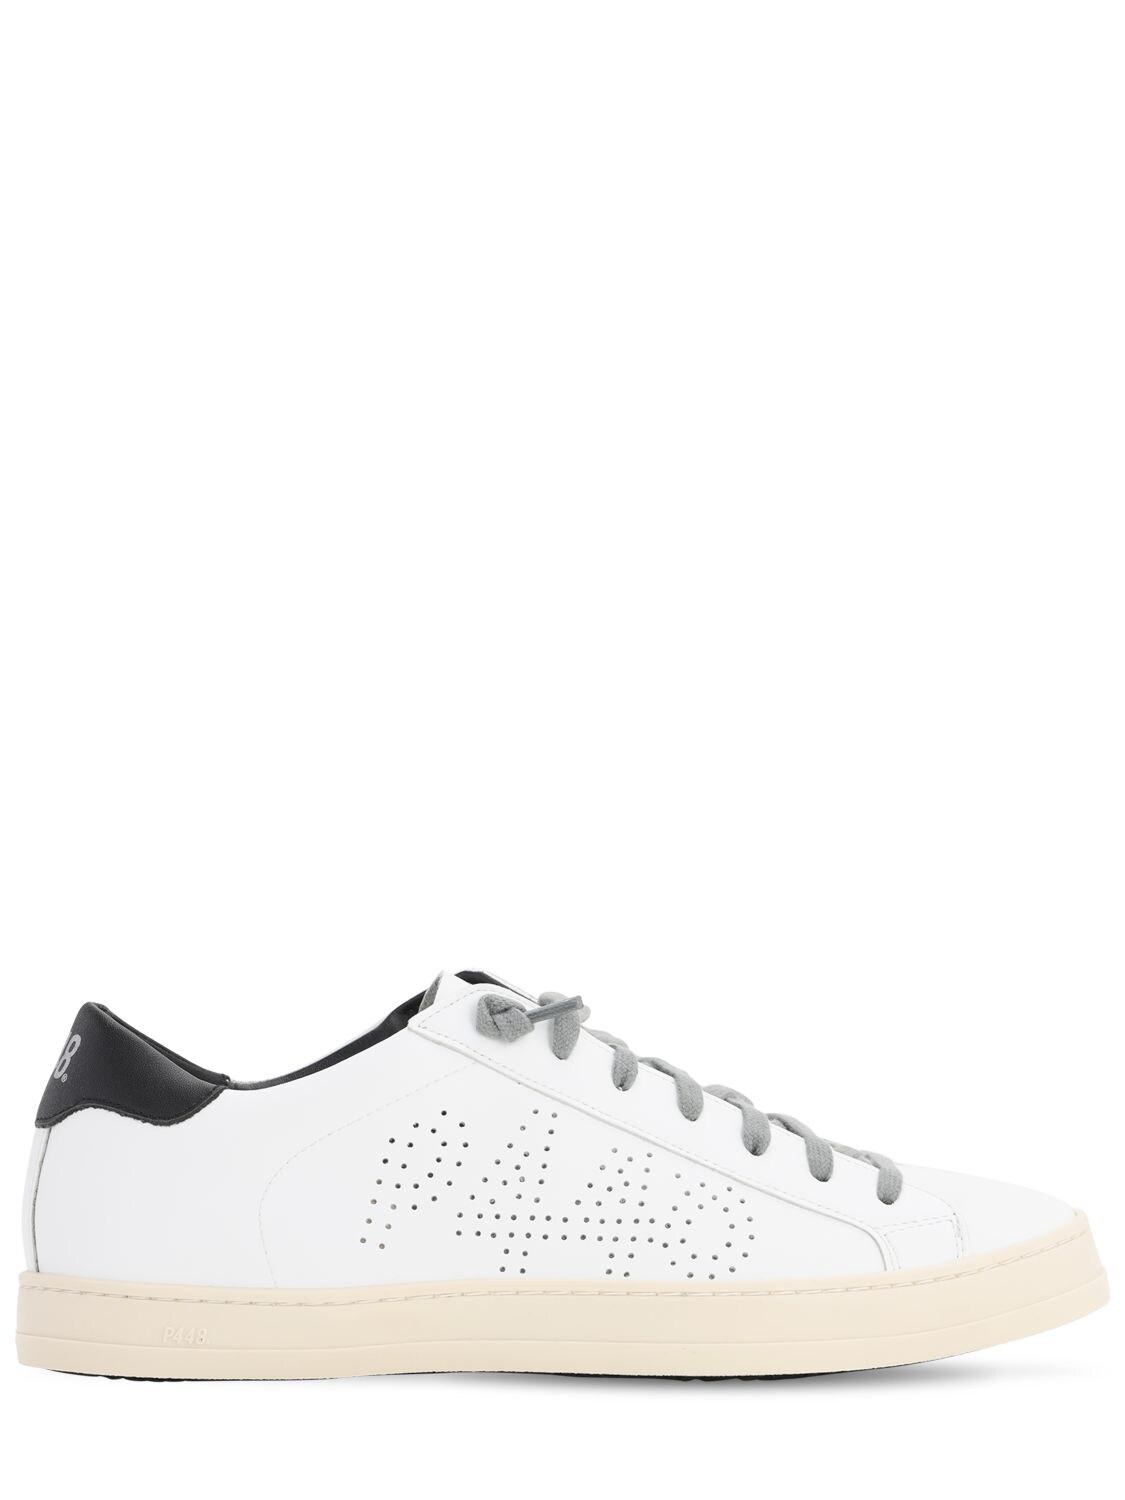 P448 John Recycled Leather Low-top Sneakers In White,black